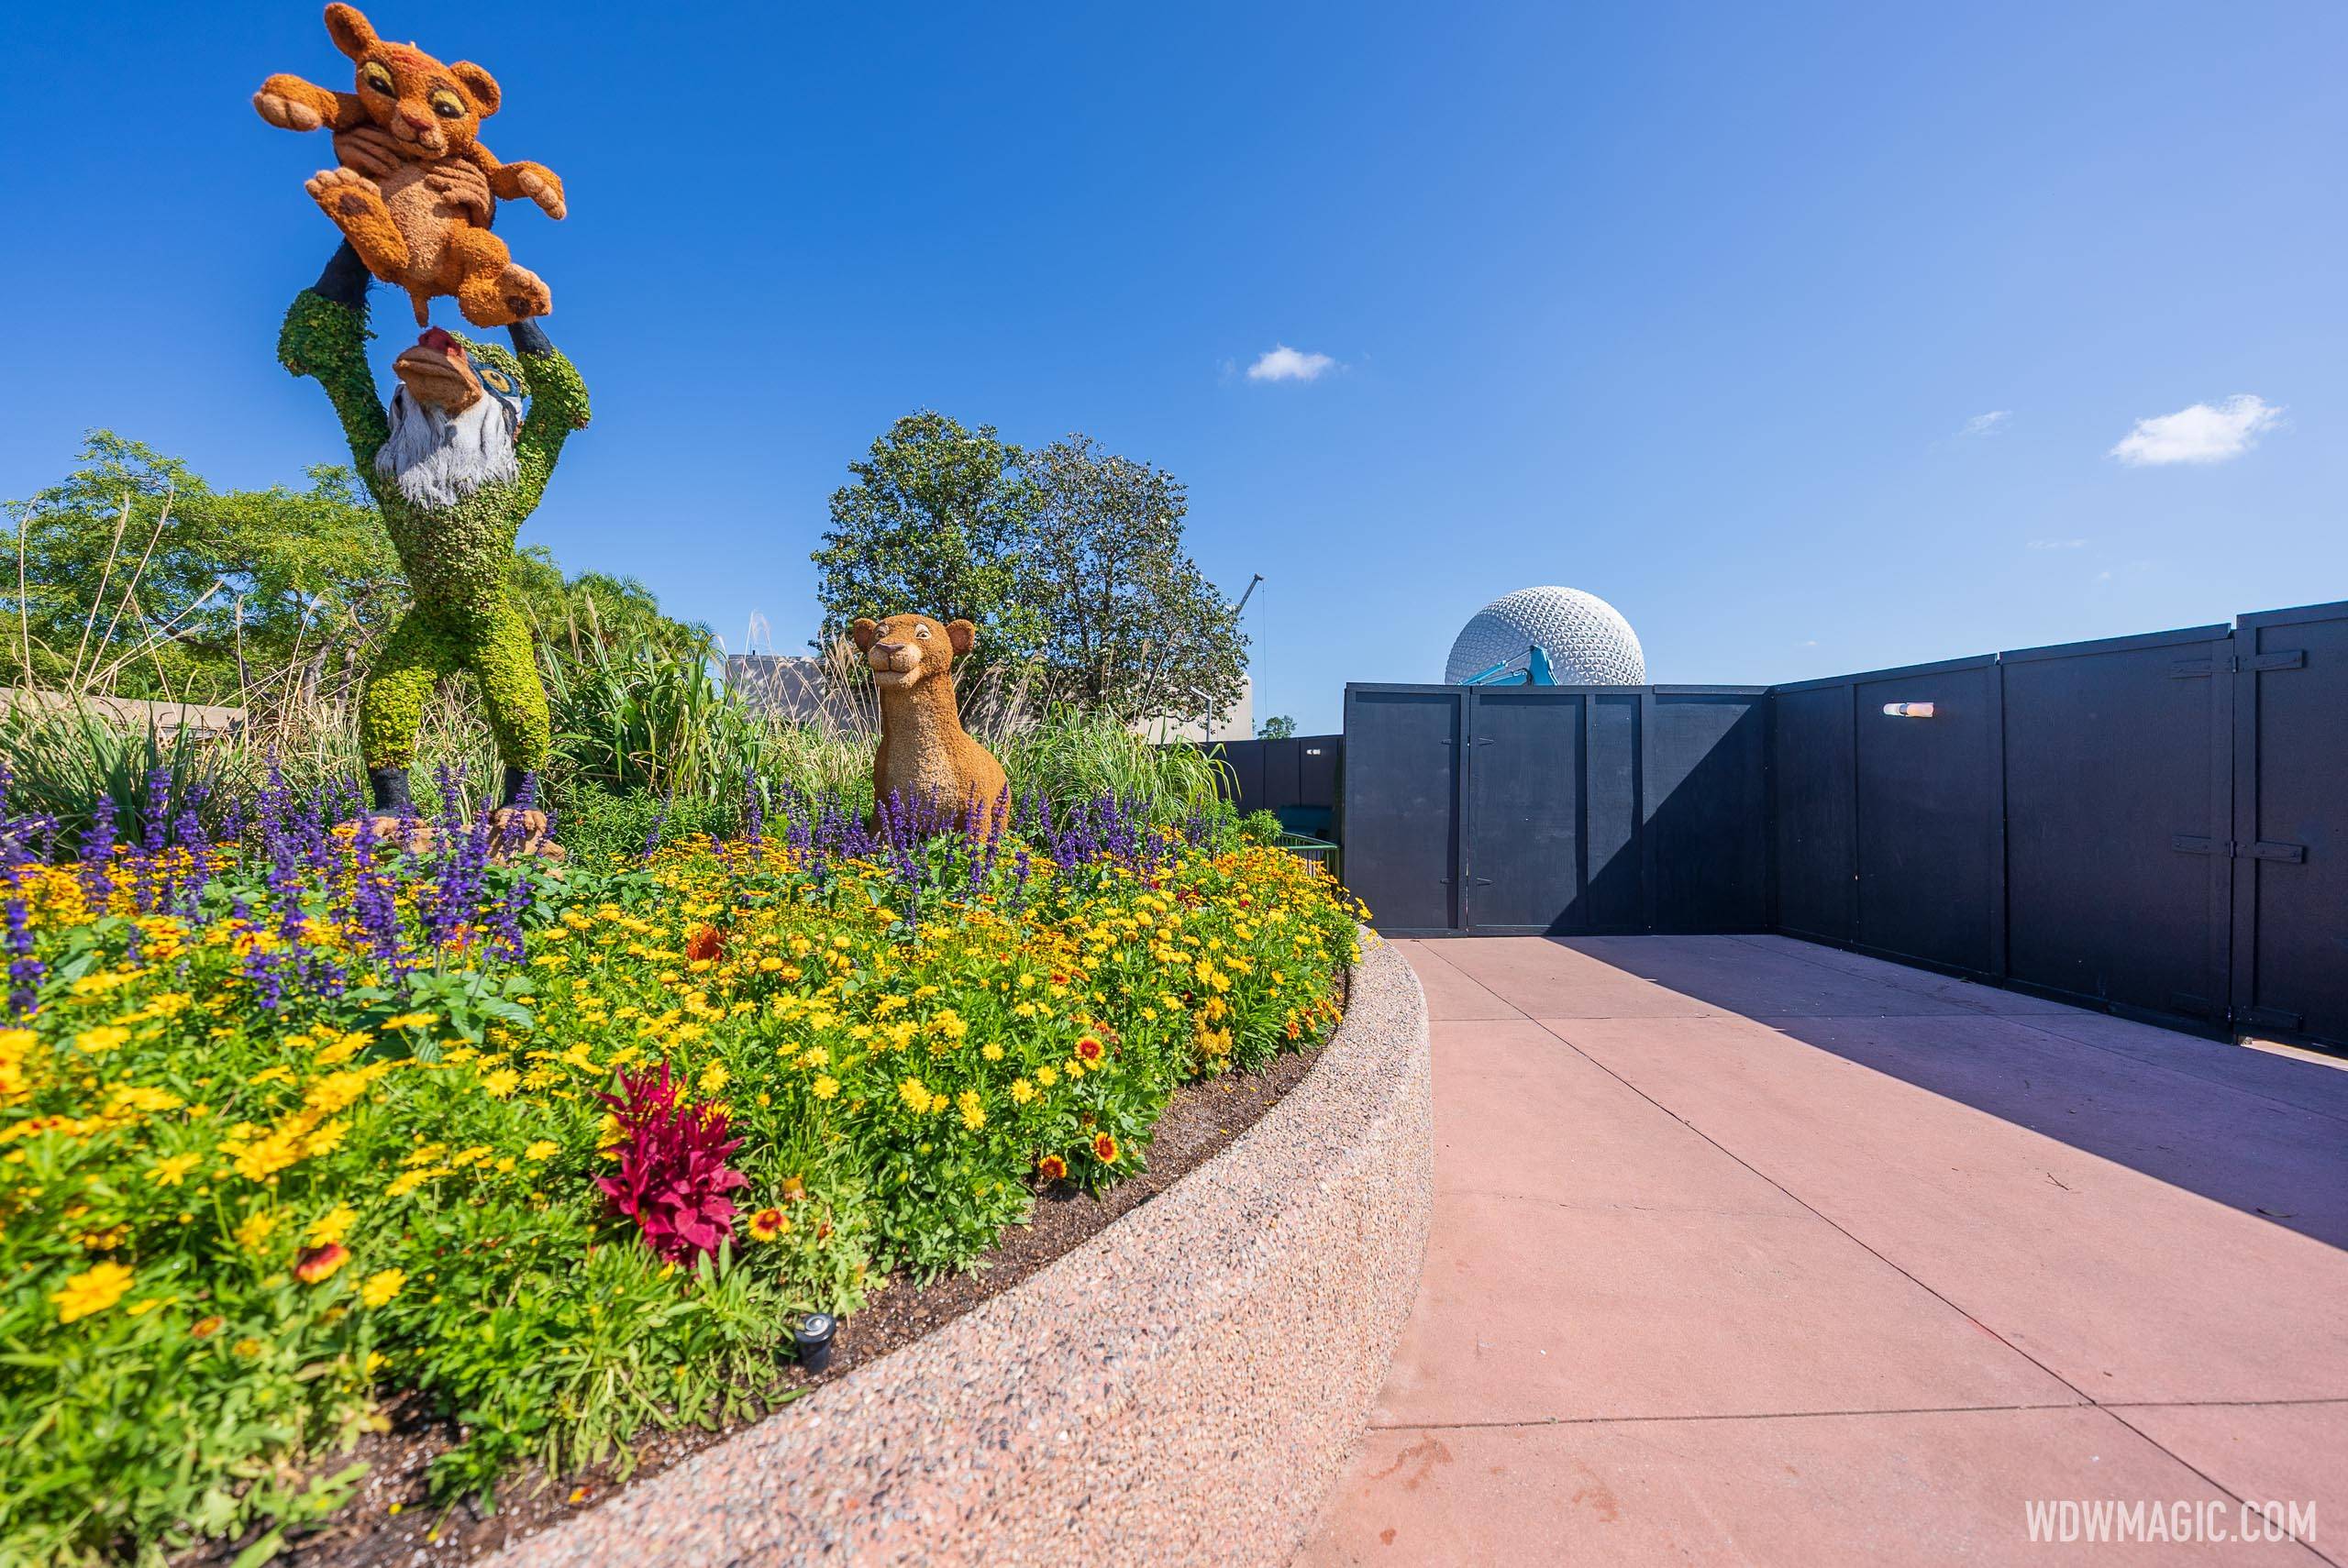 Construction walls in World Nature and restroom closure - April 26 2022